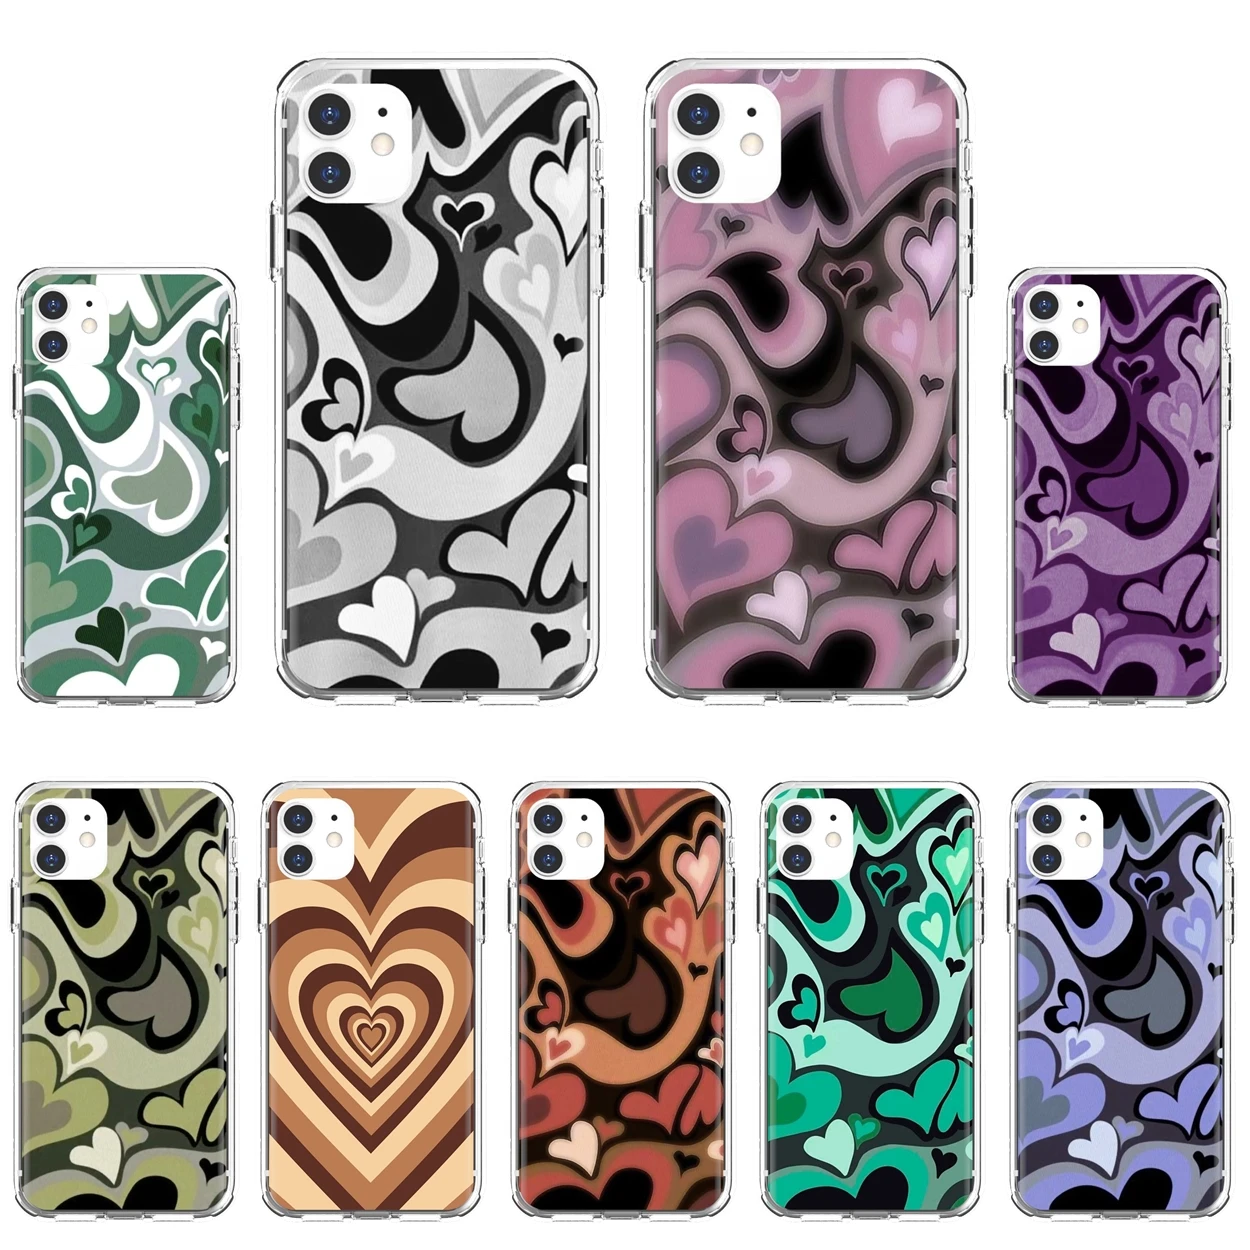 

For iPod Touch iPhone 10 11 12 Pro 4S 5S SE 5C 6 6S 7 8 X XR XS Plus Max 2020 Soft Cases Wildflower Pisces colour changing Heart